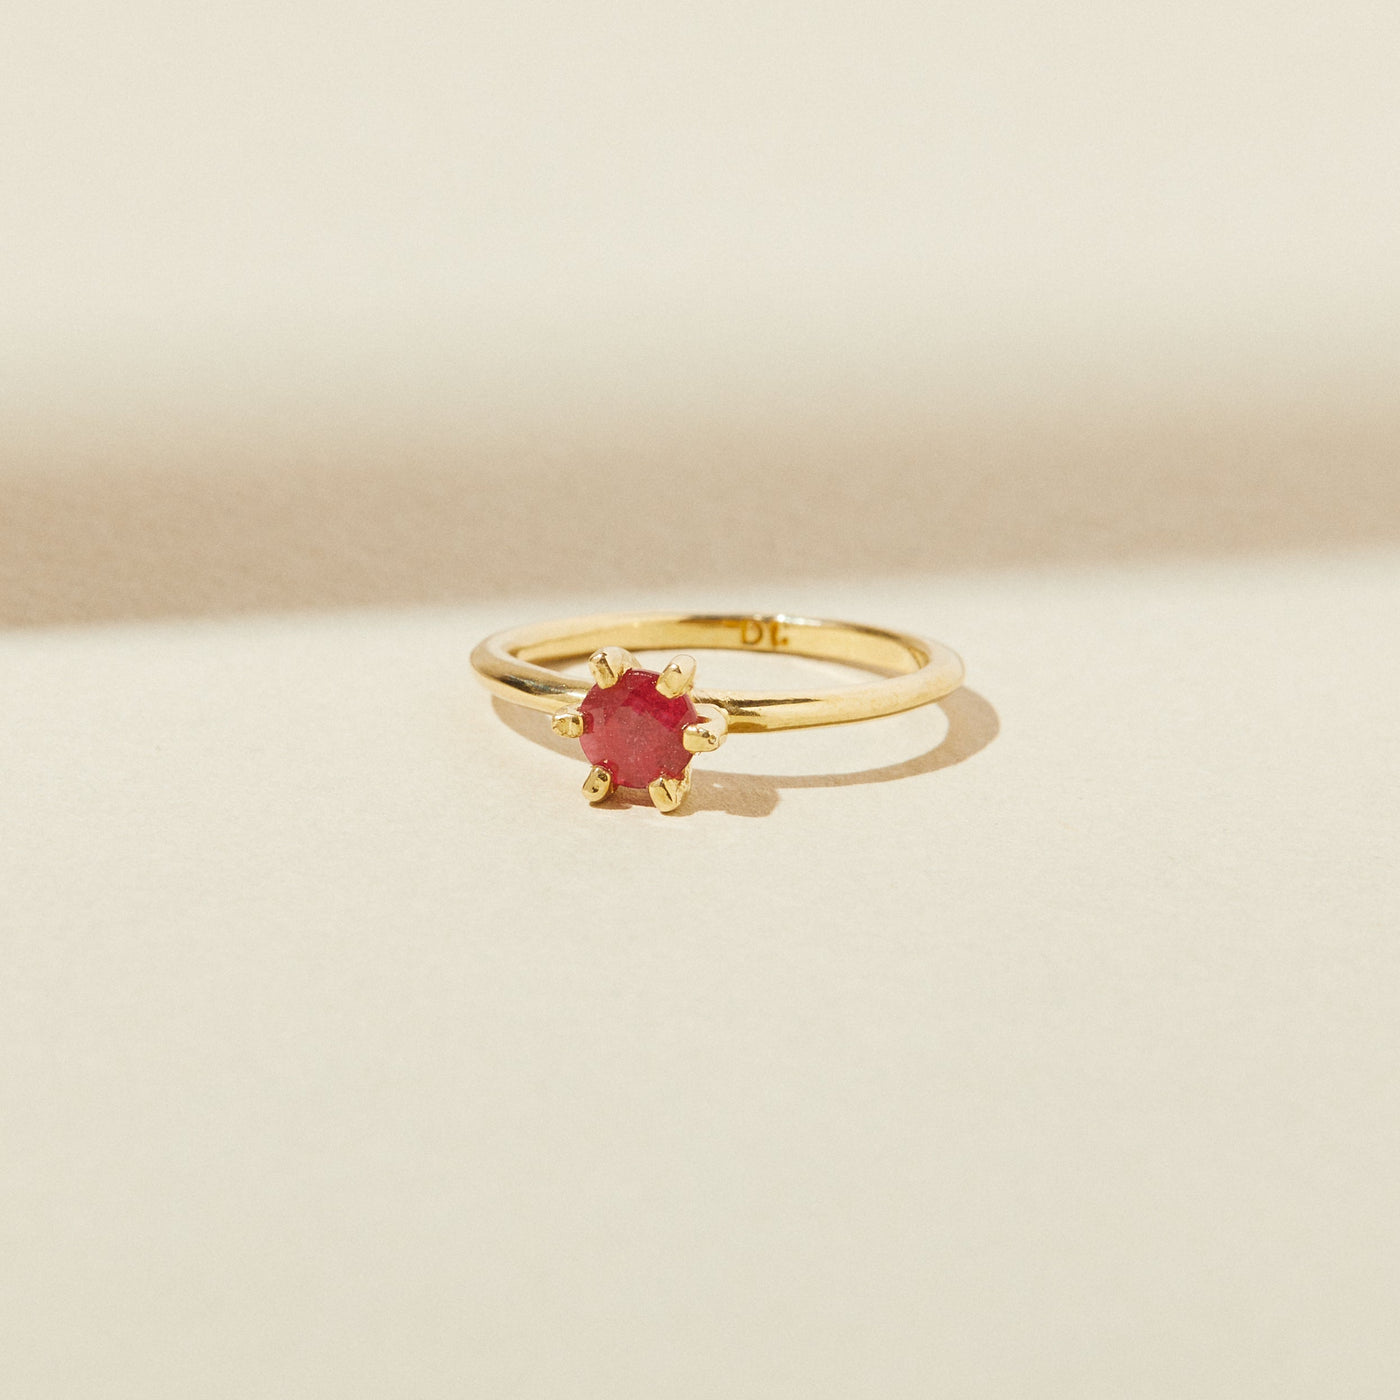 July Birthstone Ring with Ruby